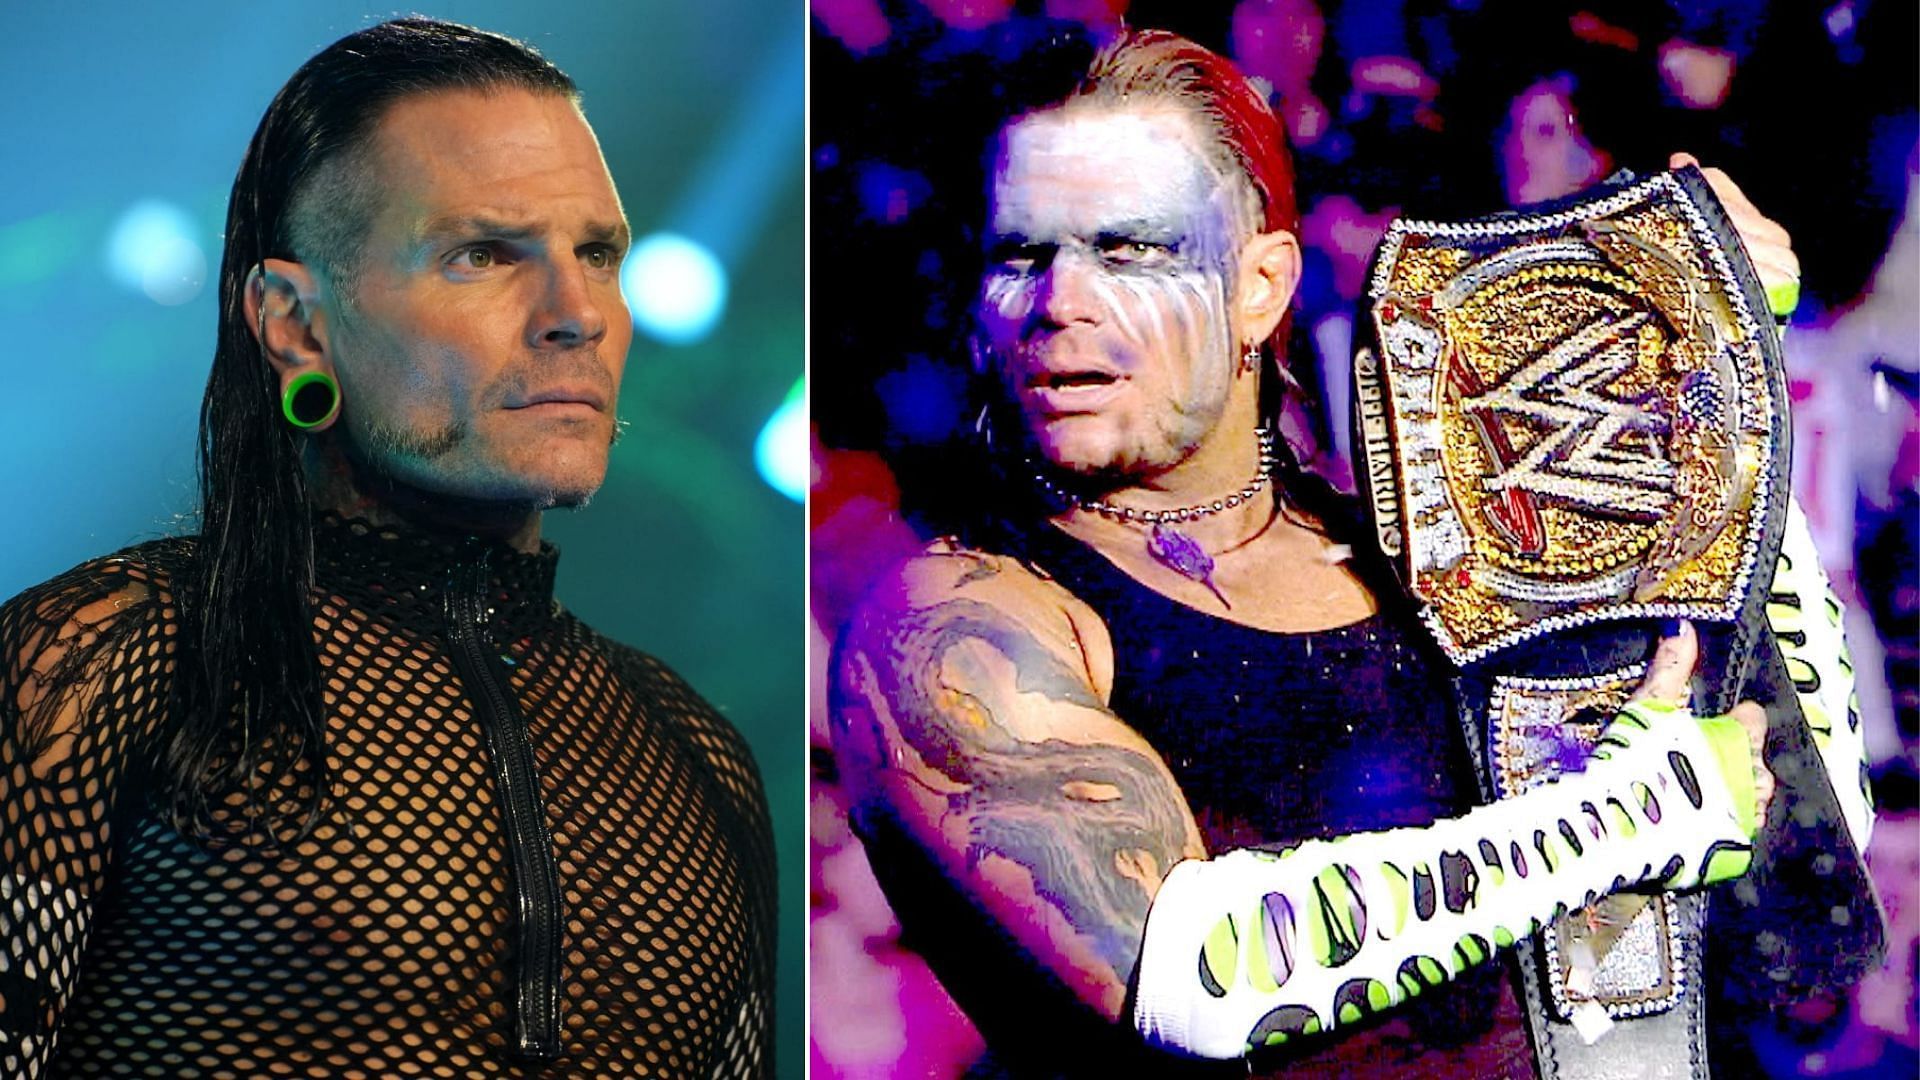 Jeff Hardy is a former multi-time world champion in WWE